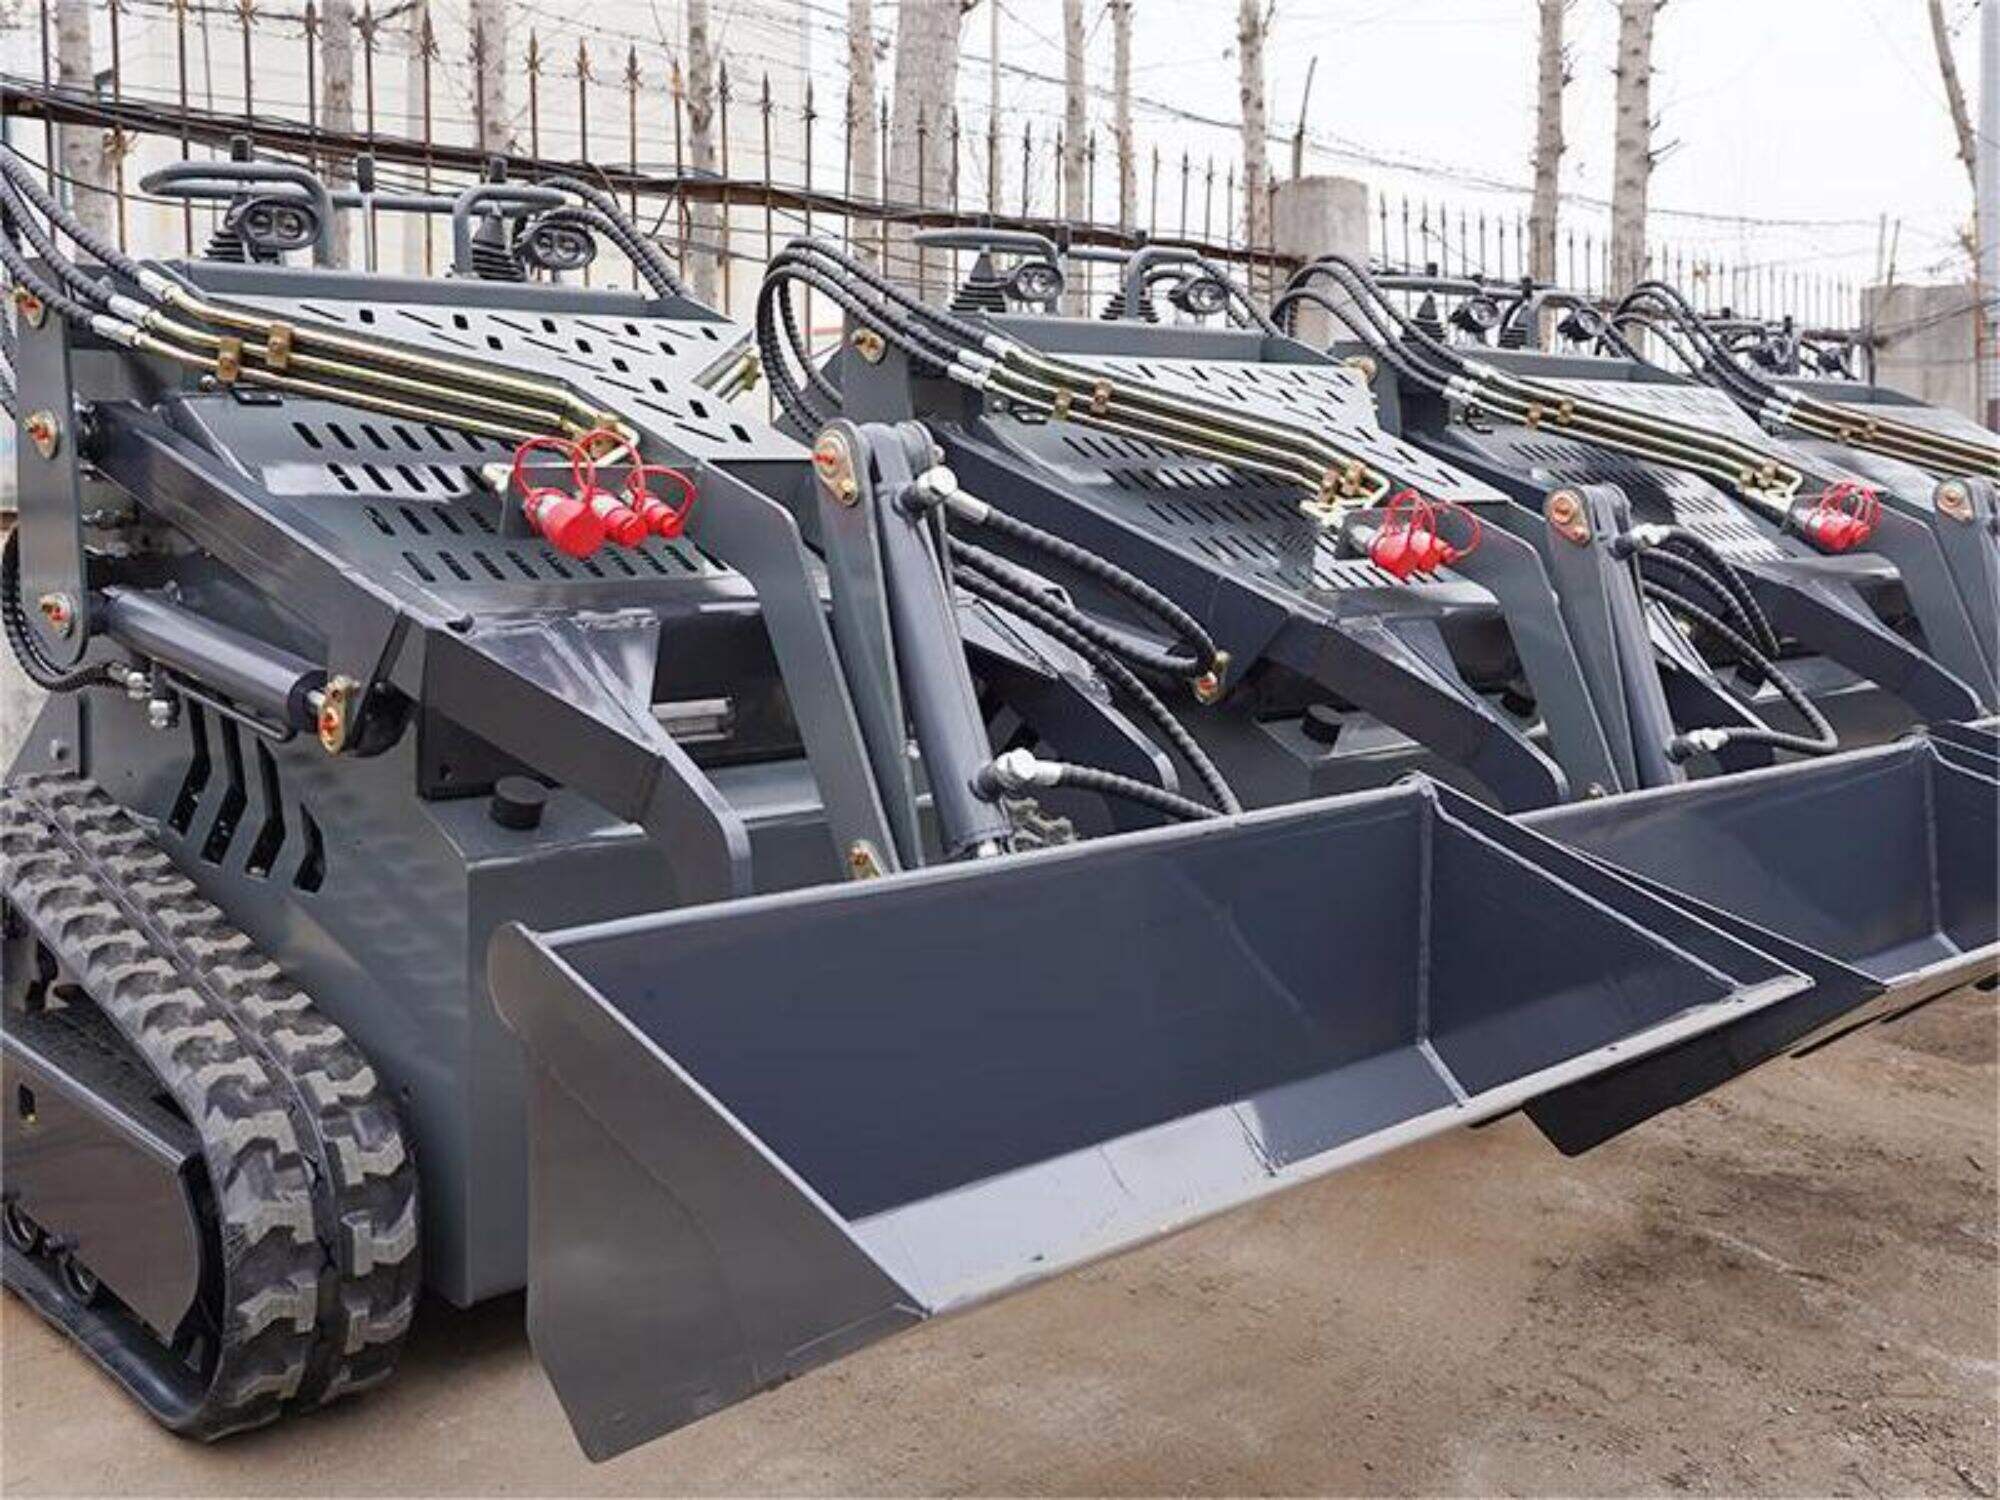 Skid steer loaders shipped to France